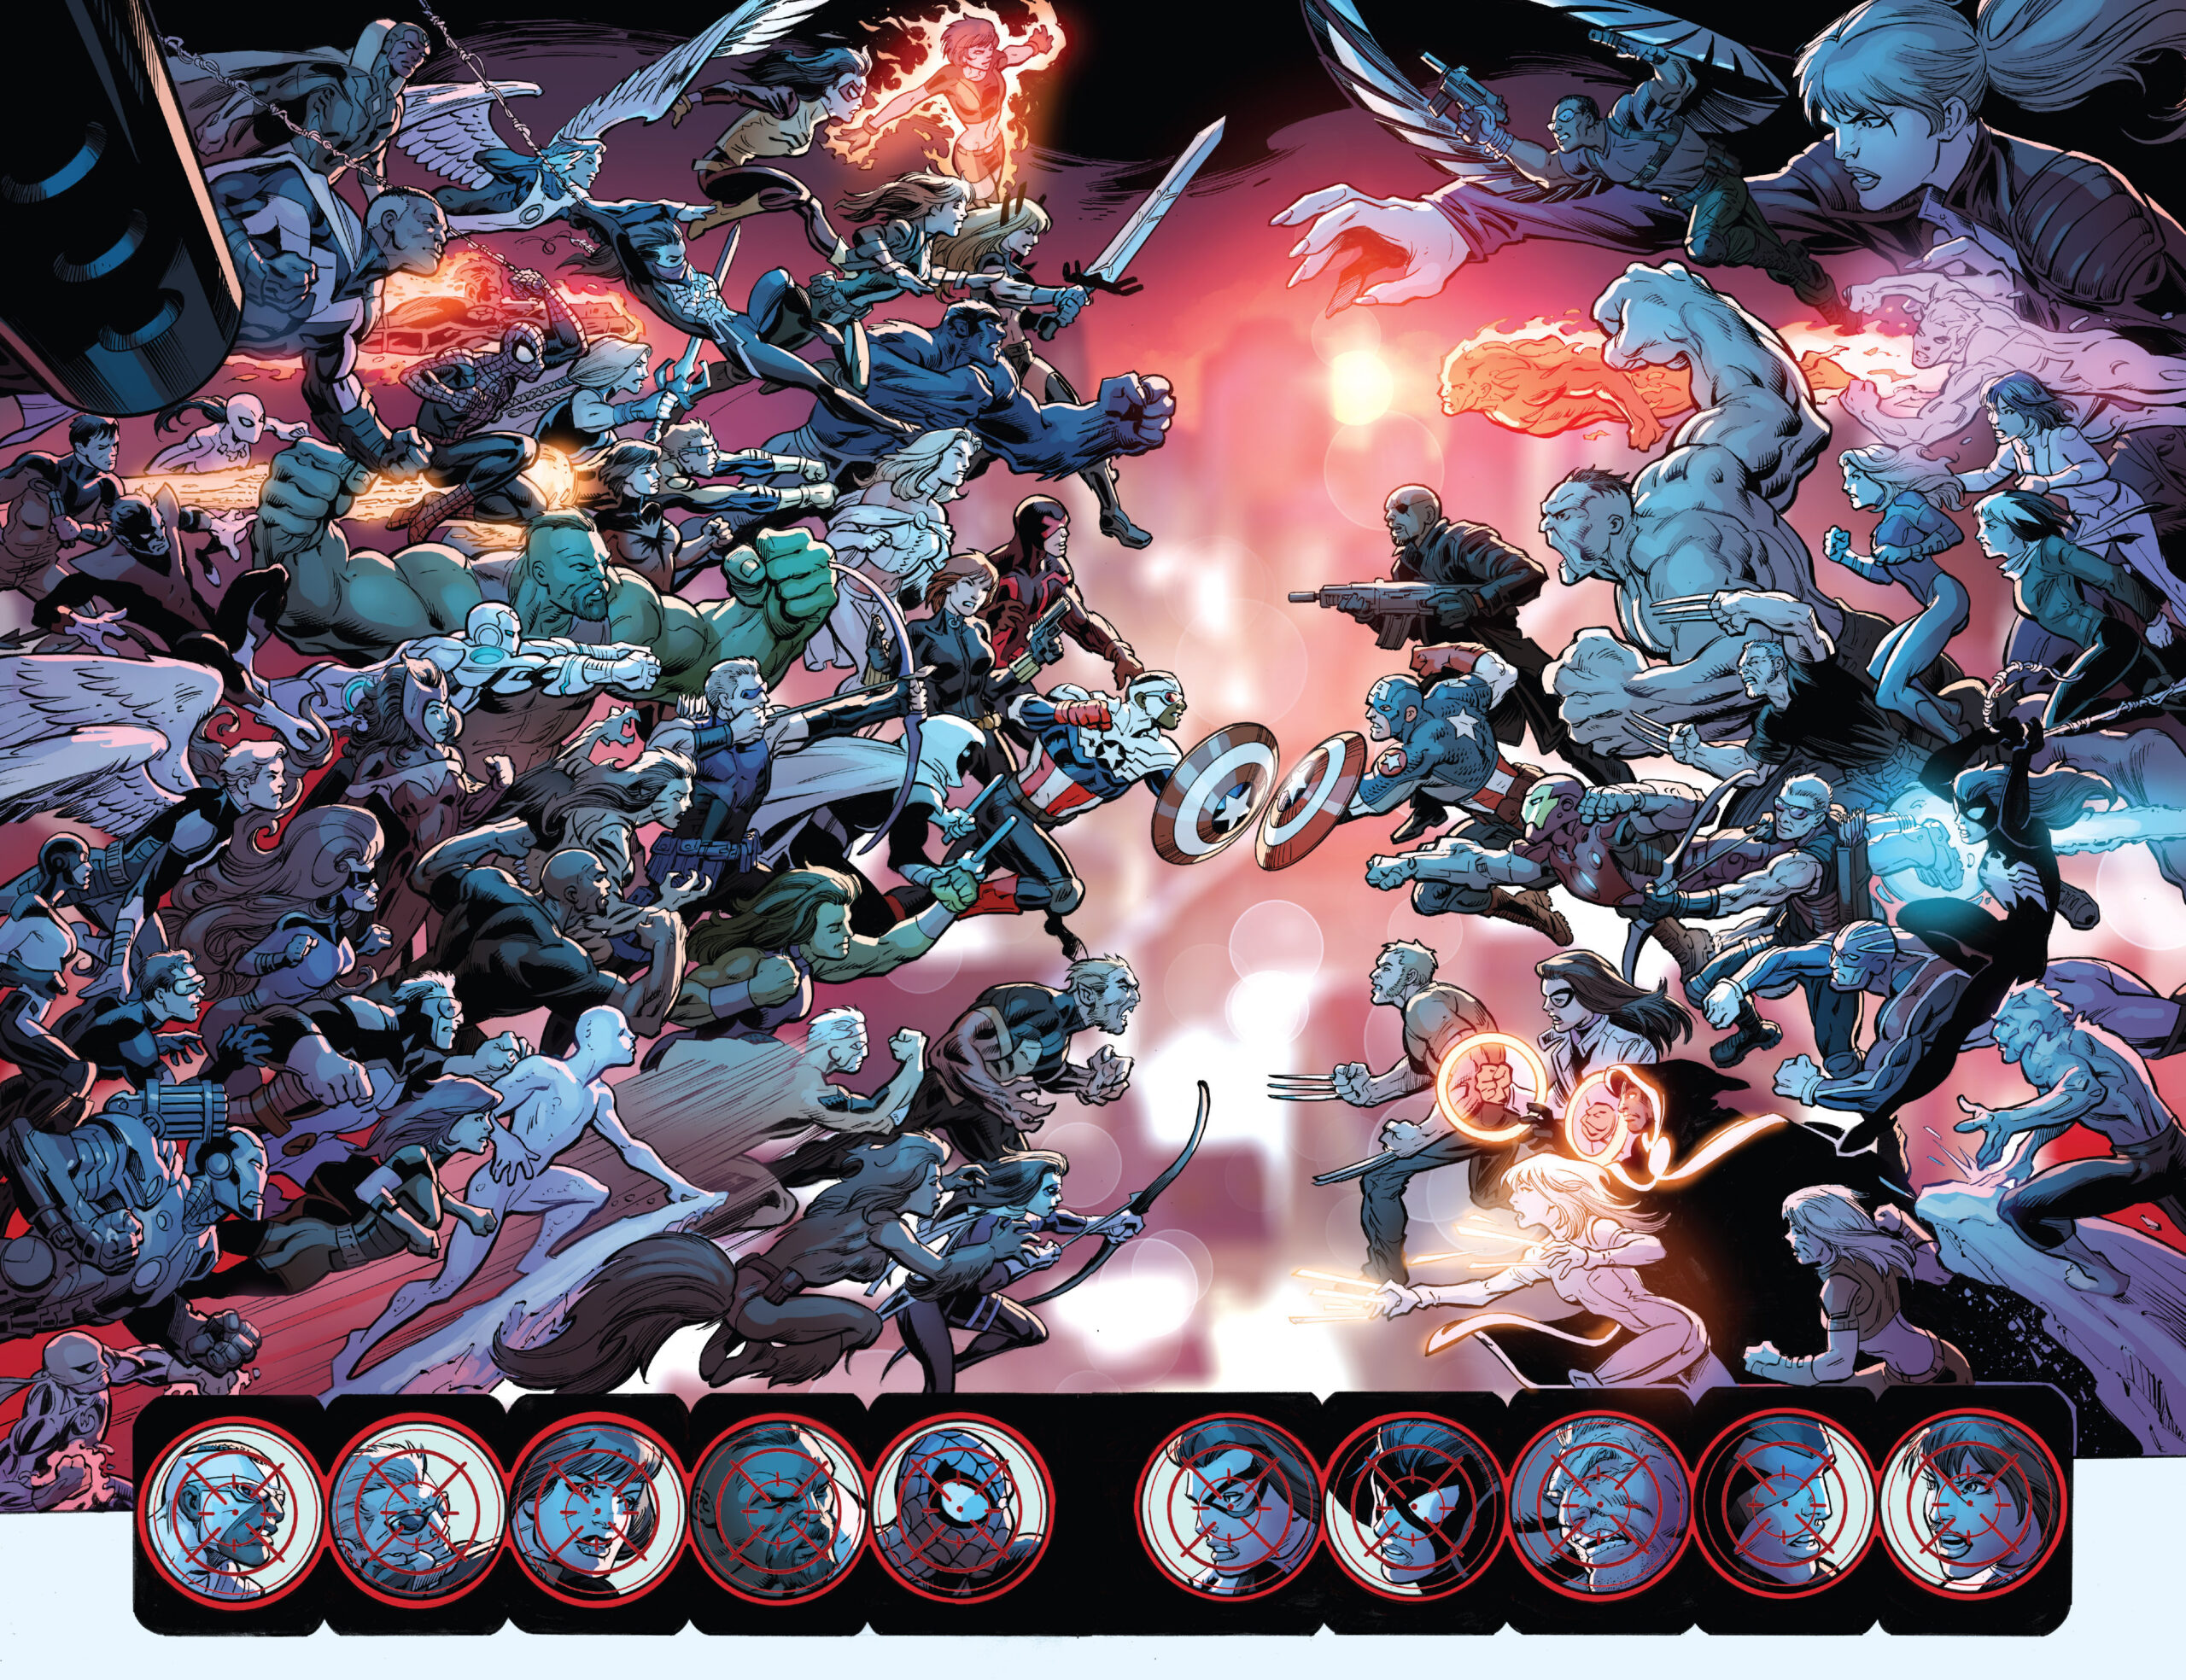 The 616 and the 1610 enter a final fight for survival in Ultimate End Vol. 1 #1 (2015), Marvel Comics. Art by Mark Bagley, Scott Hanna, and Justin Ponsor.